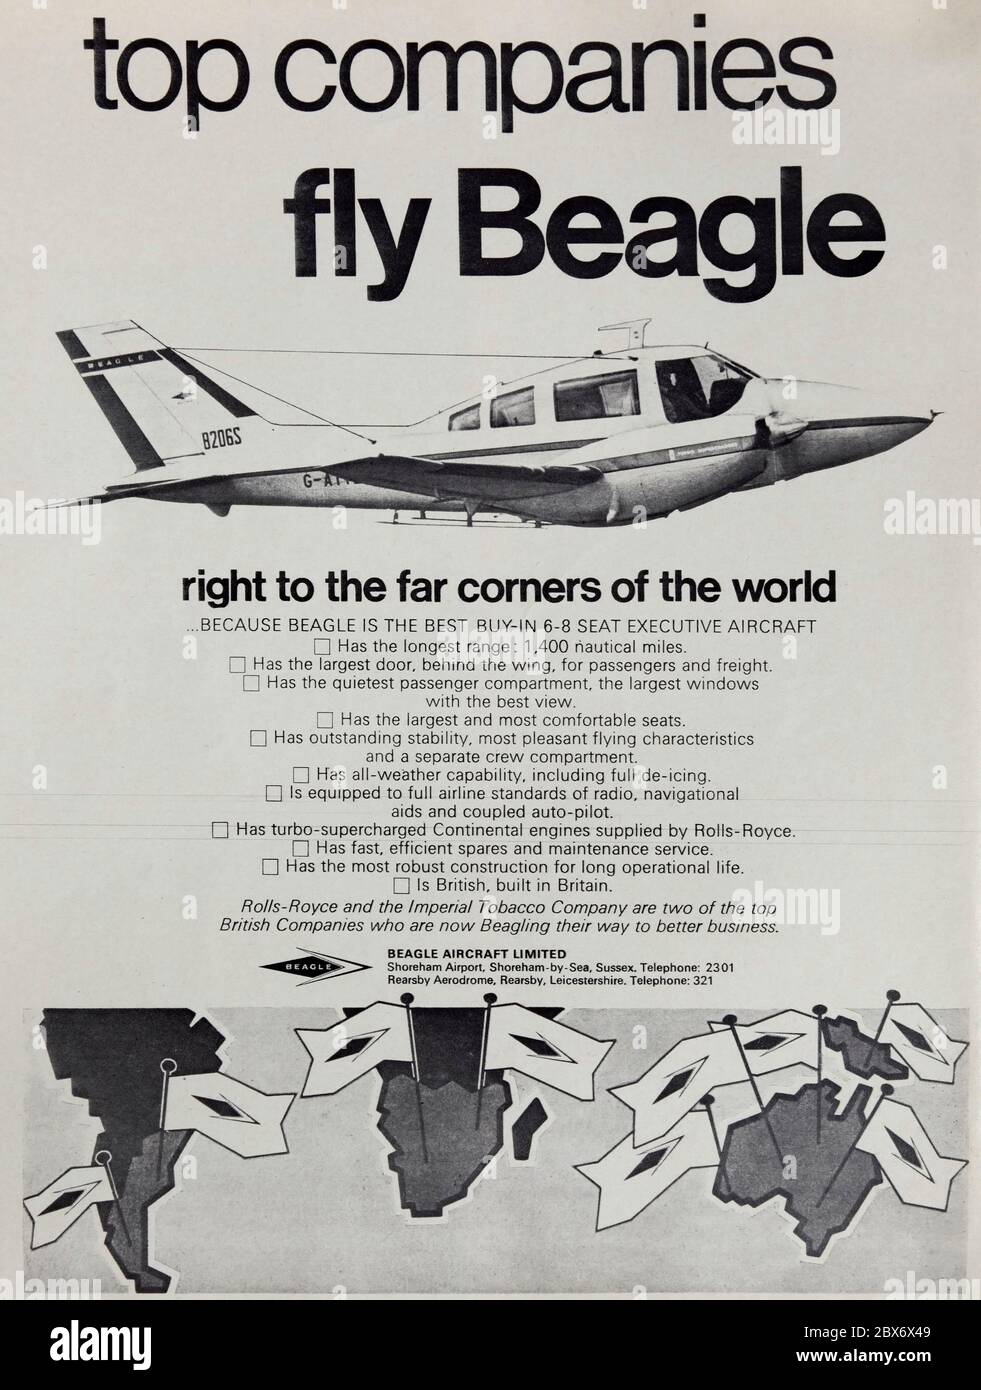 Vintage advertisement for Beagle light aircraft. Stock Photo